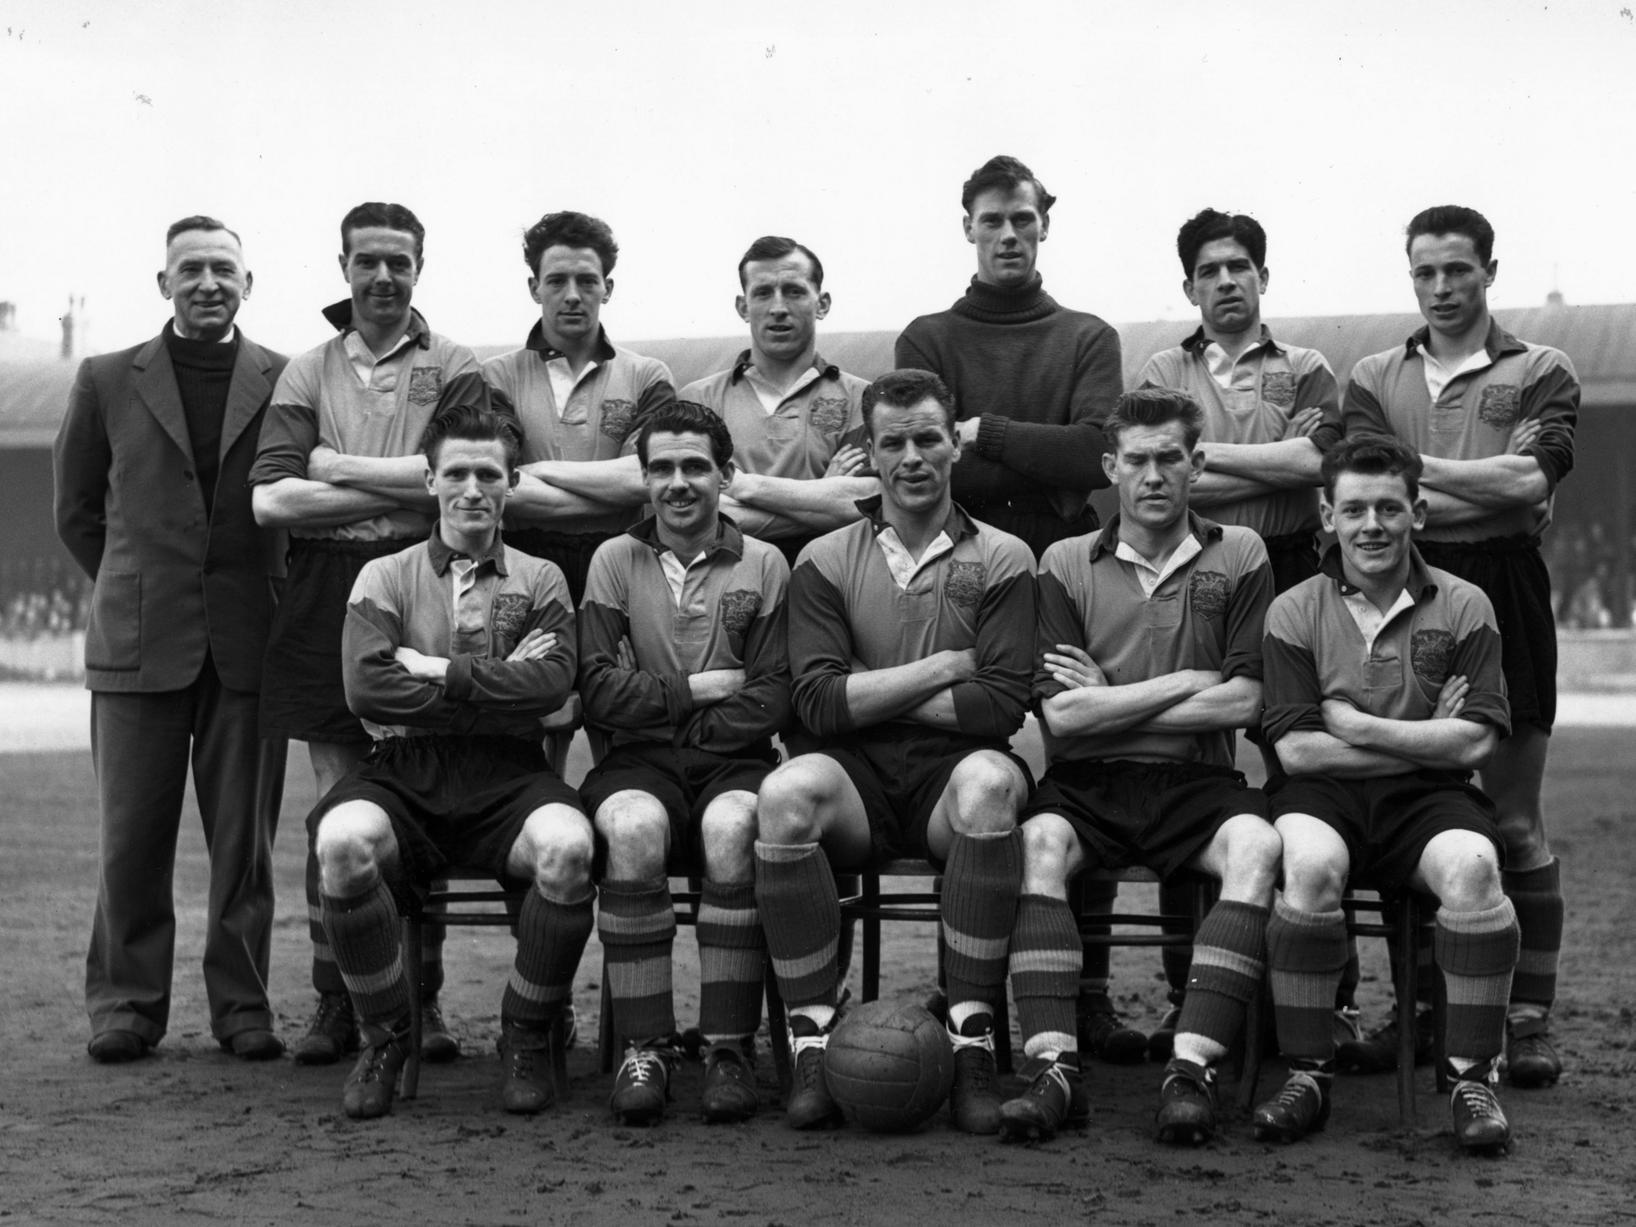 Dunn (back row, fourth from left) also made 134 consecutive league starts for Leeds United, a run that ended in September 1957. John Charles called him 'one of the best full-backs I ever played with.'